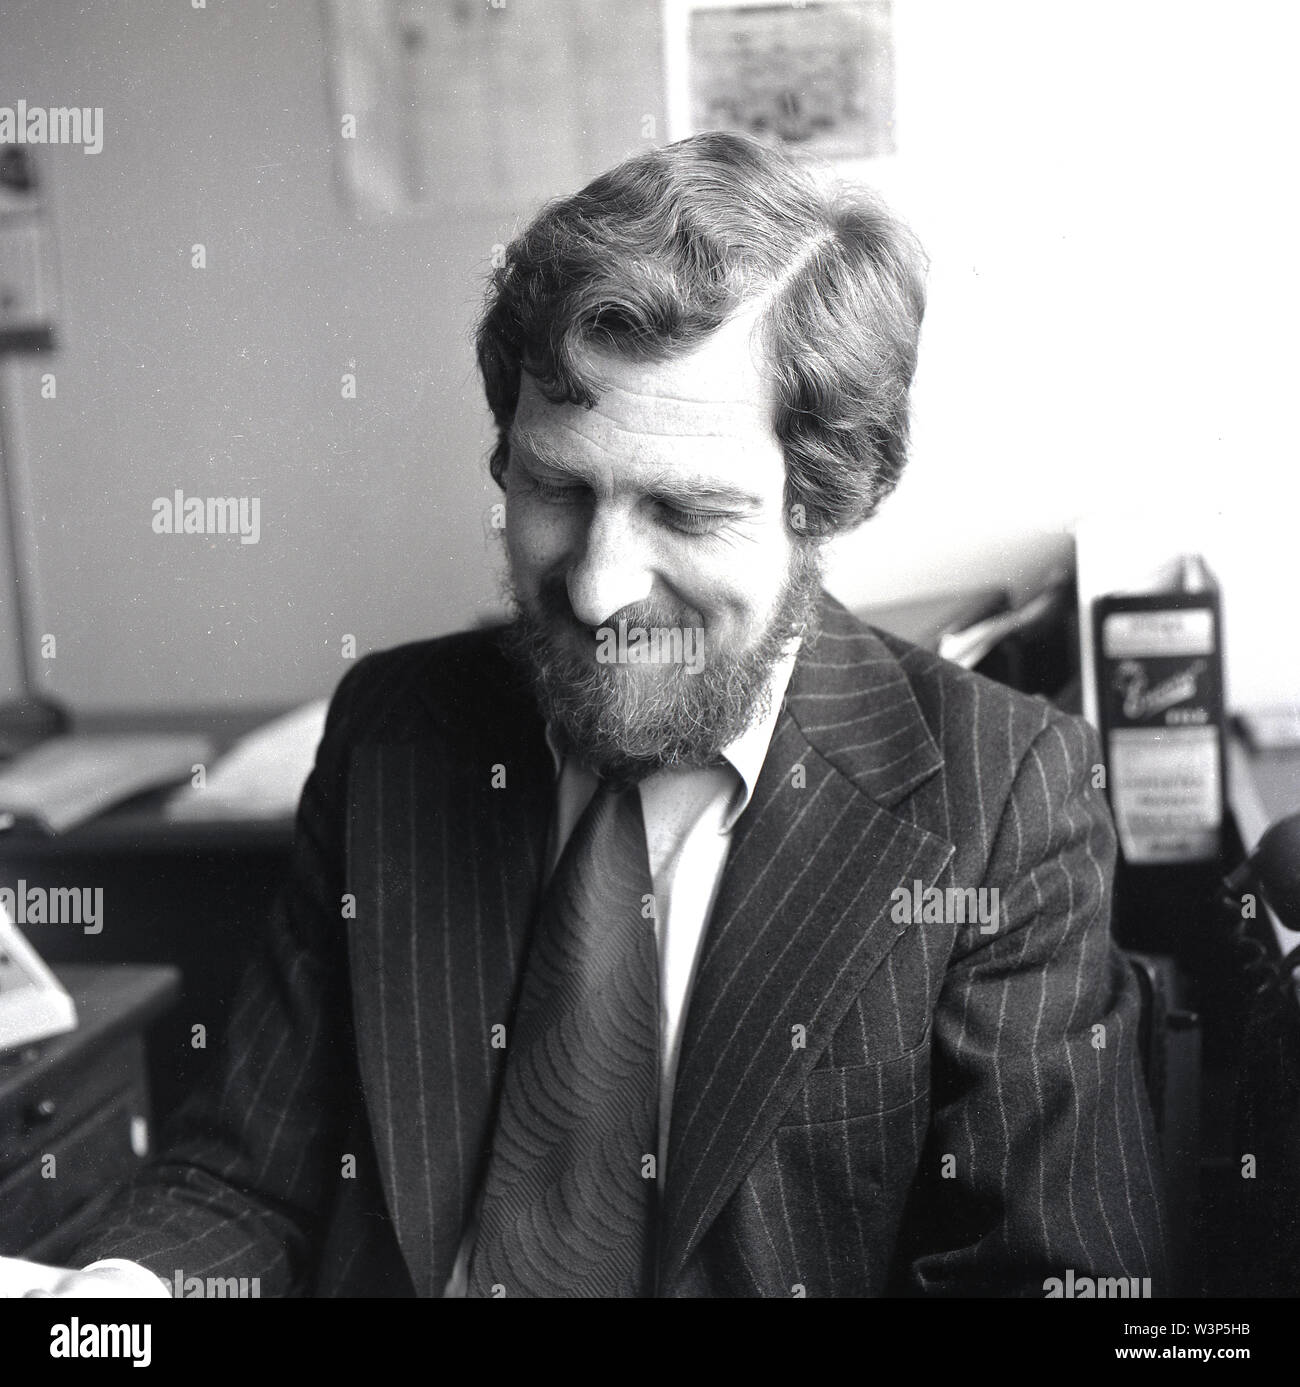 1970s, historical, a bearded man in an office wearing a suit of the era, a pinstripe with wide lapels and a shirt and 'kipper' tie. Stock Photo